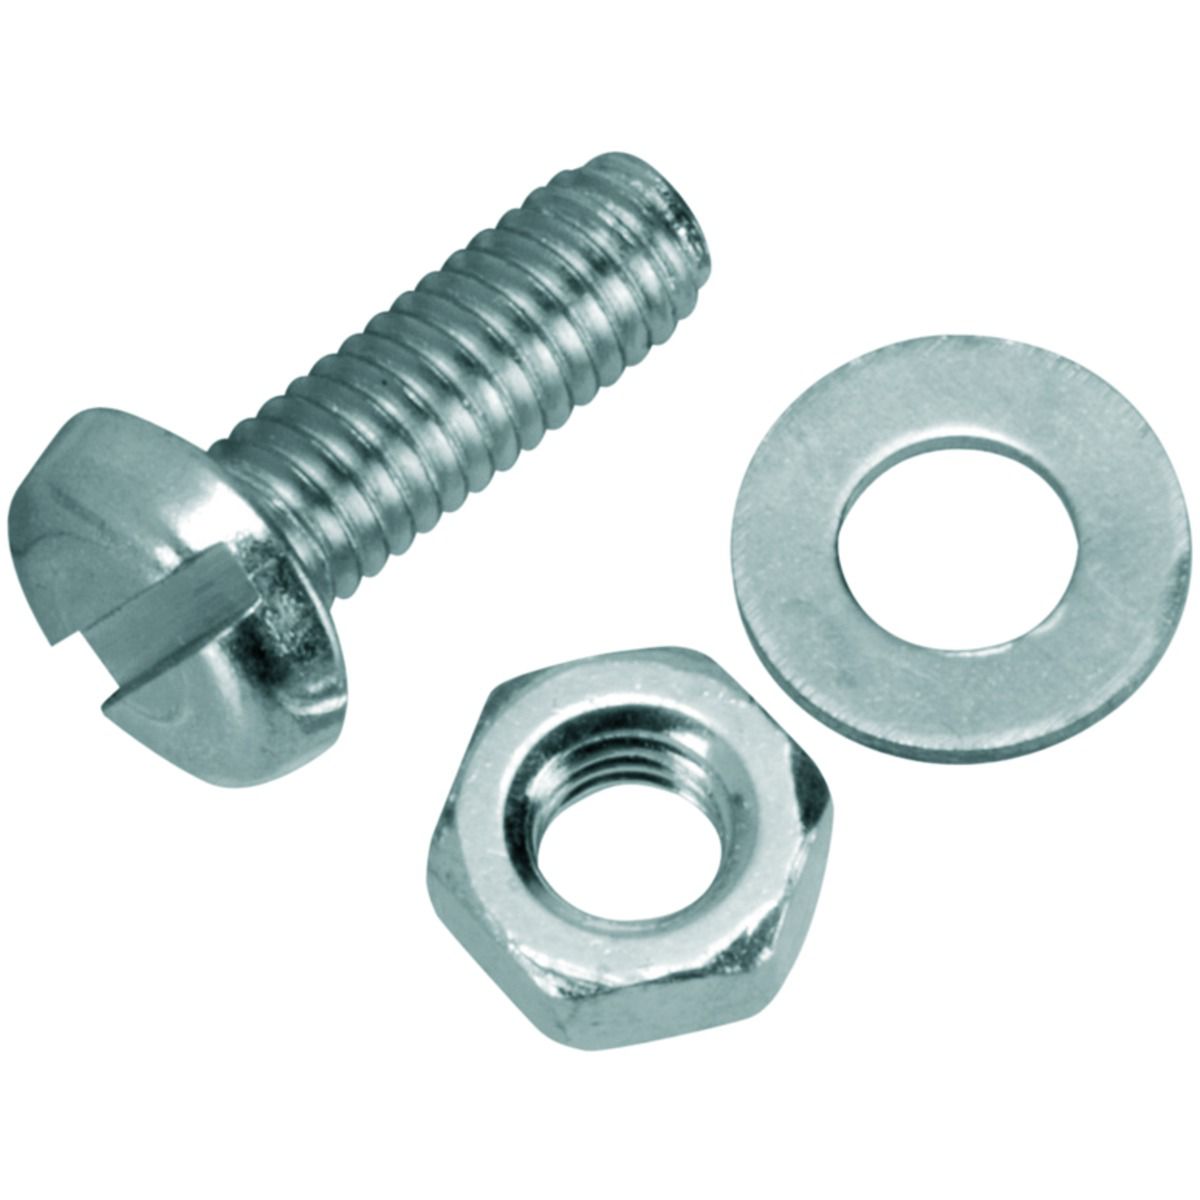 Image of Wickes Machine Screws With Nut & Washer - M4 x 12mm Pack of 10